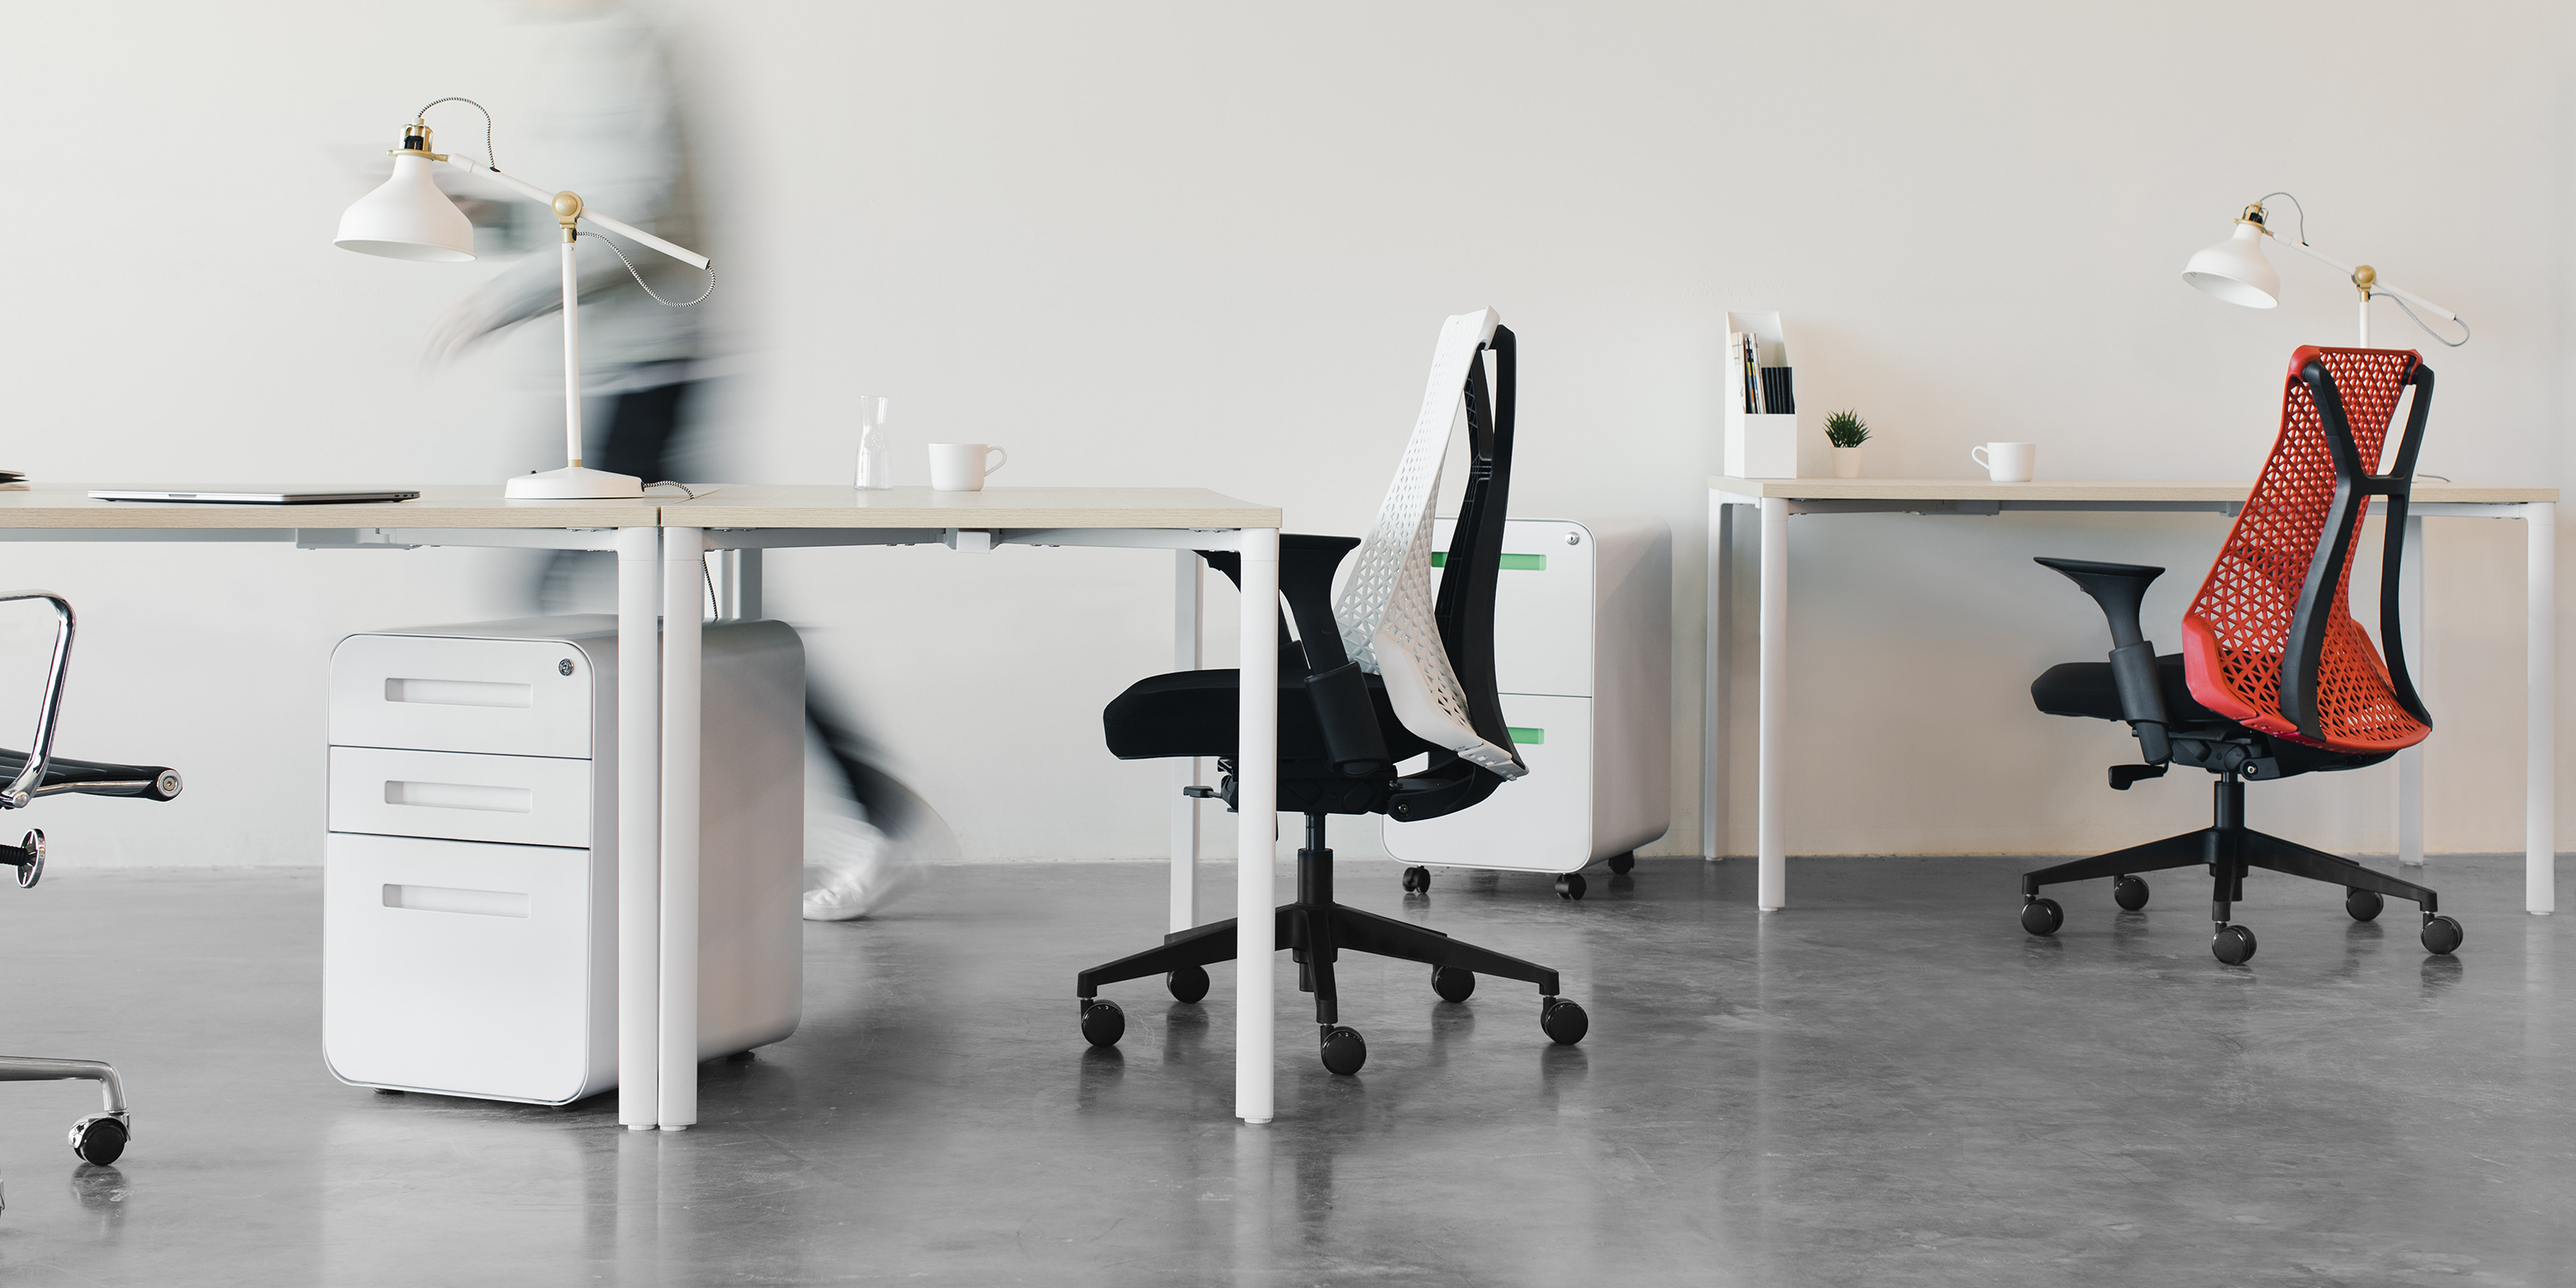 Minimal office with two swivel chairs and simple desks